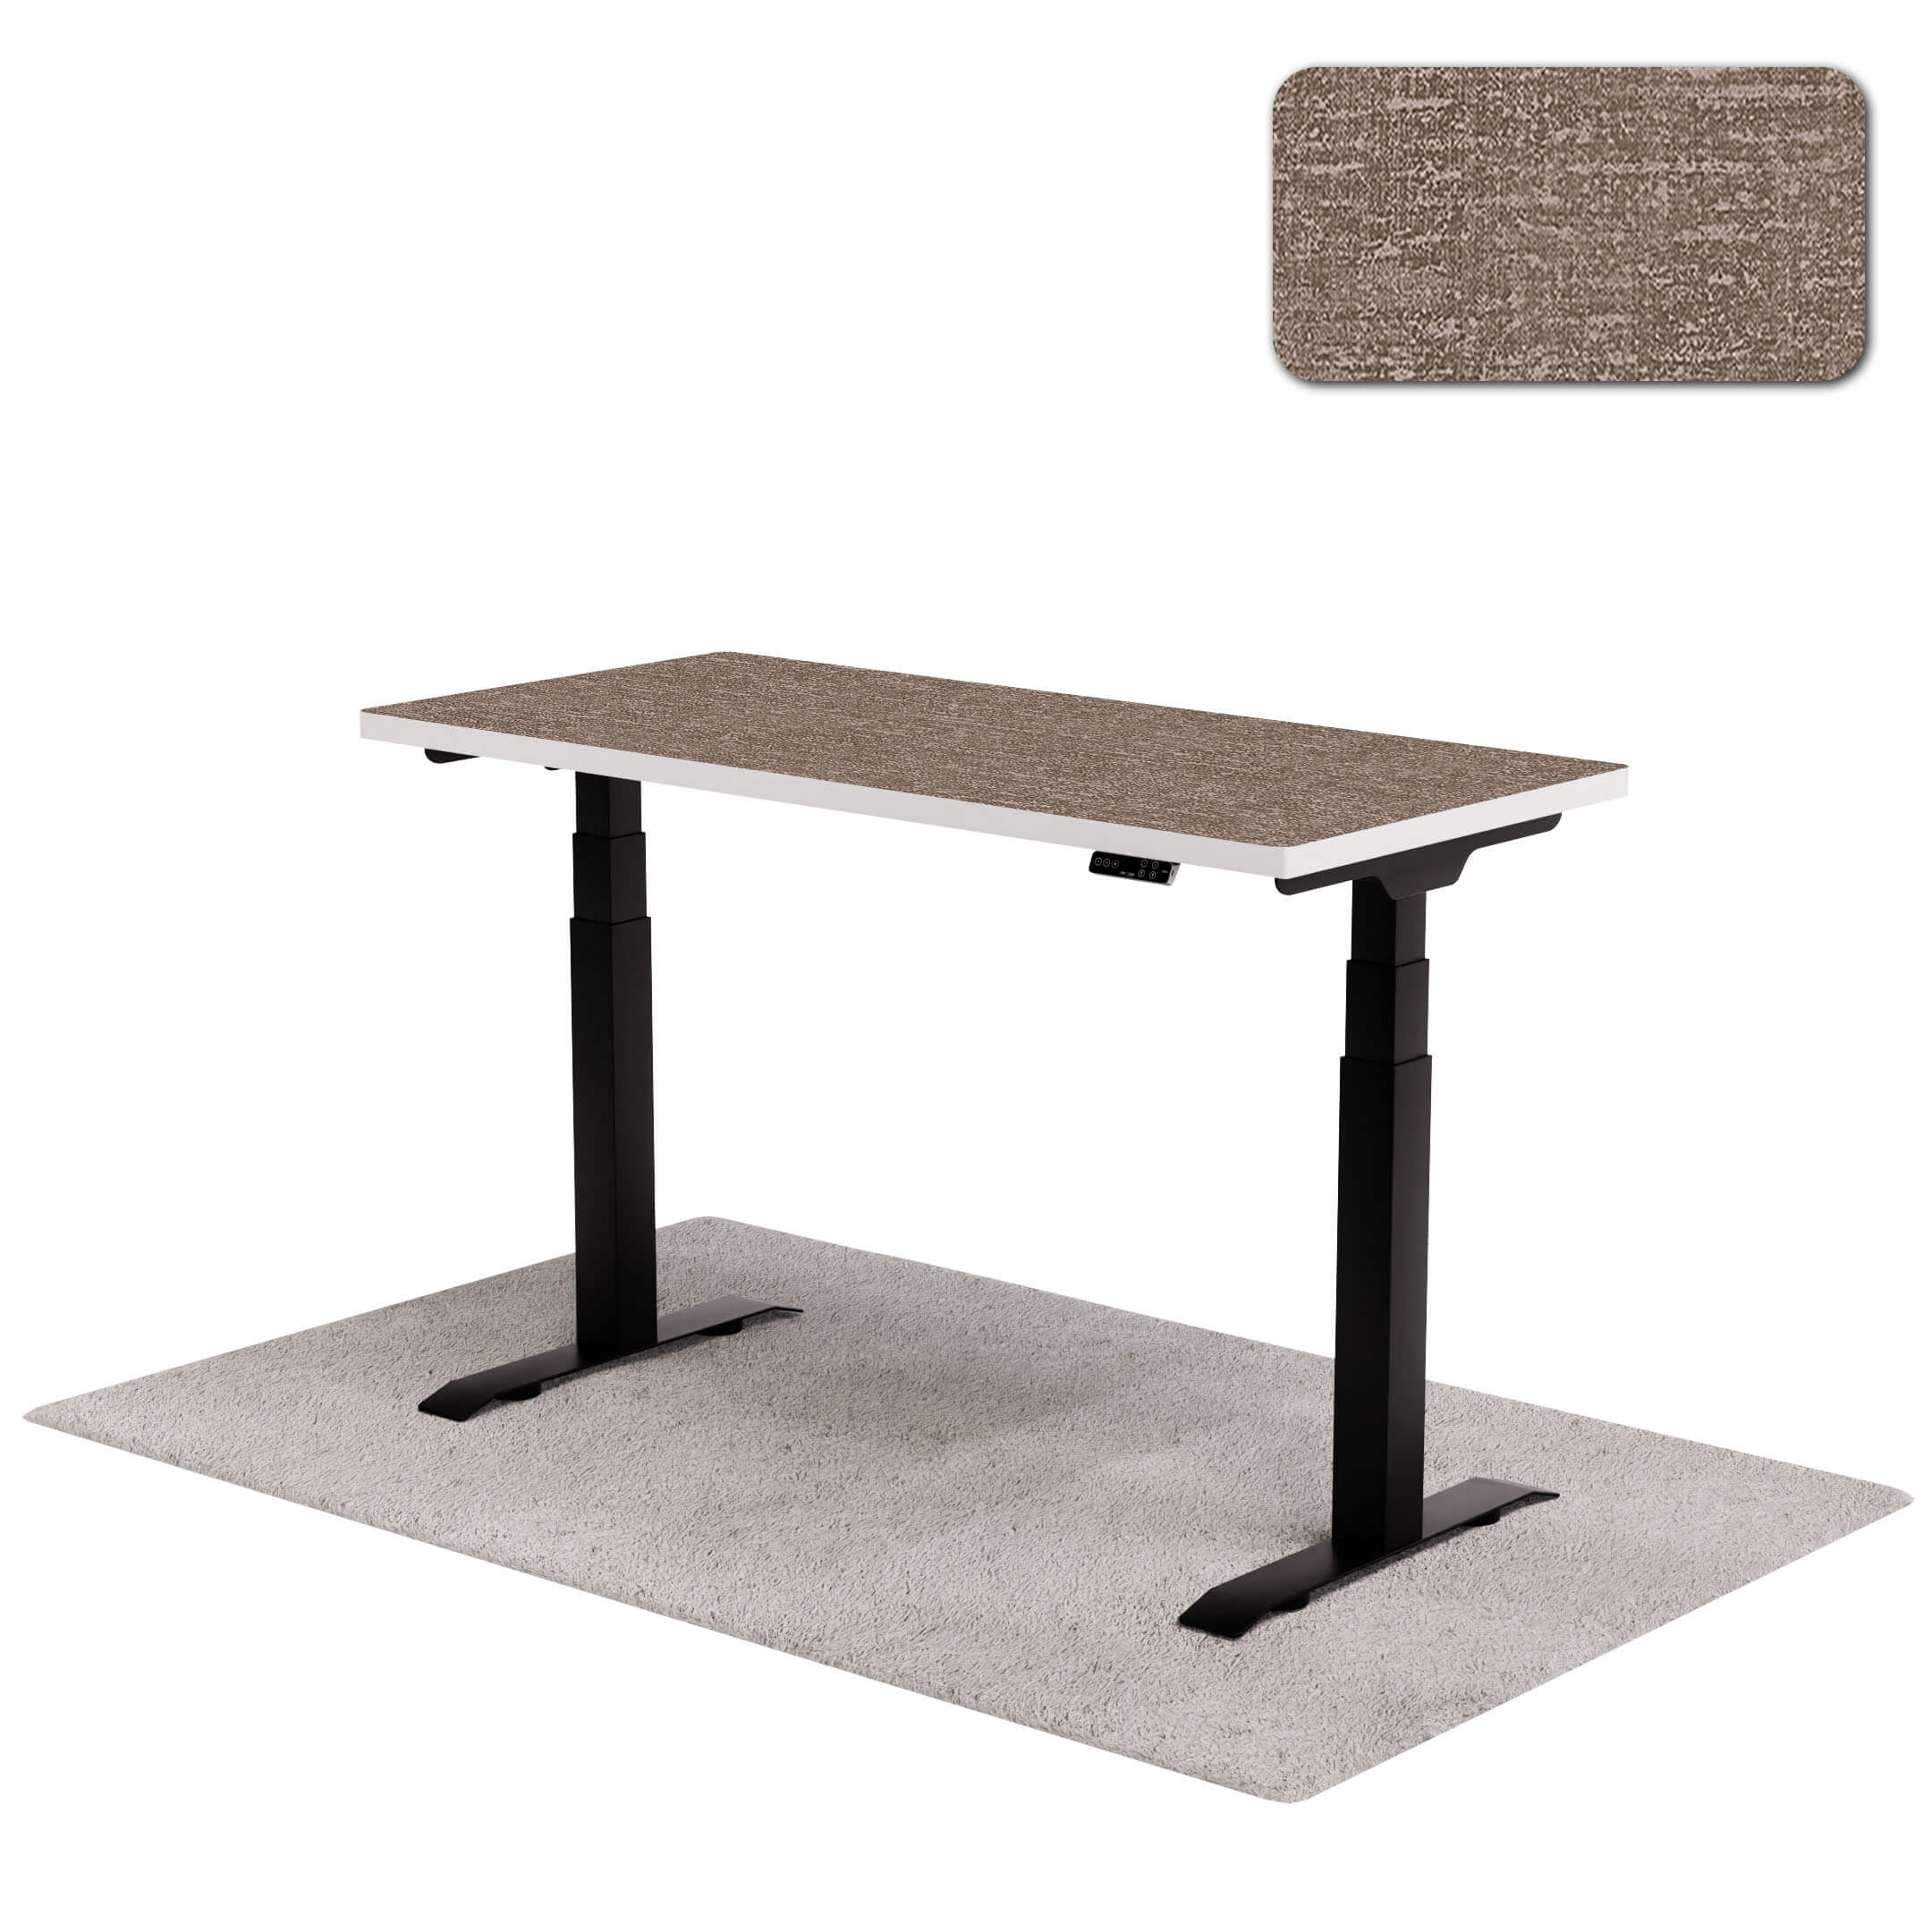 Singapore Best Pattern Desk from Onedesk brand